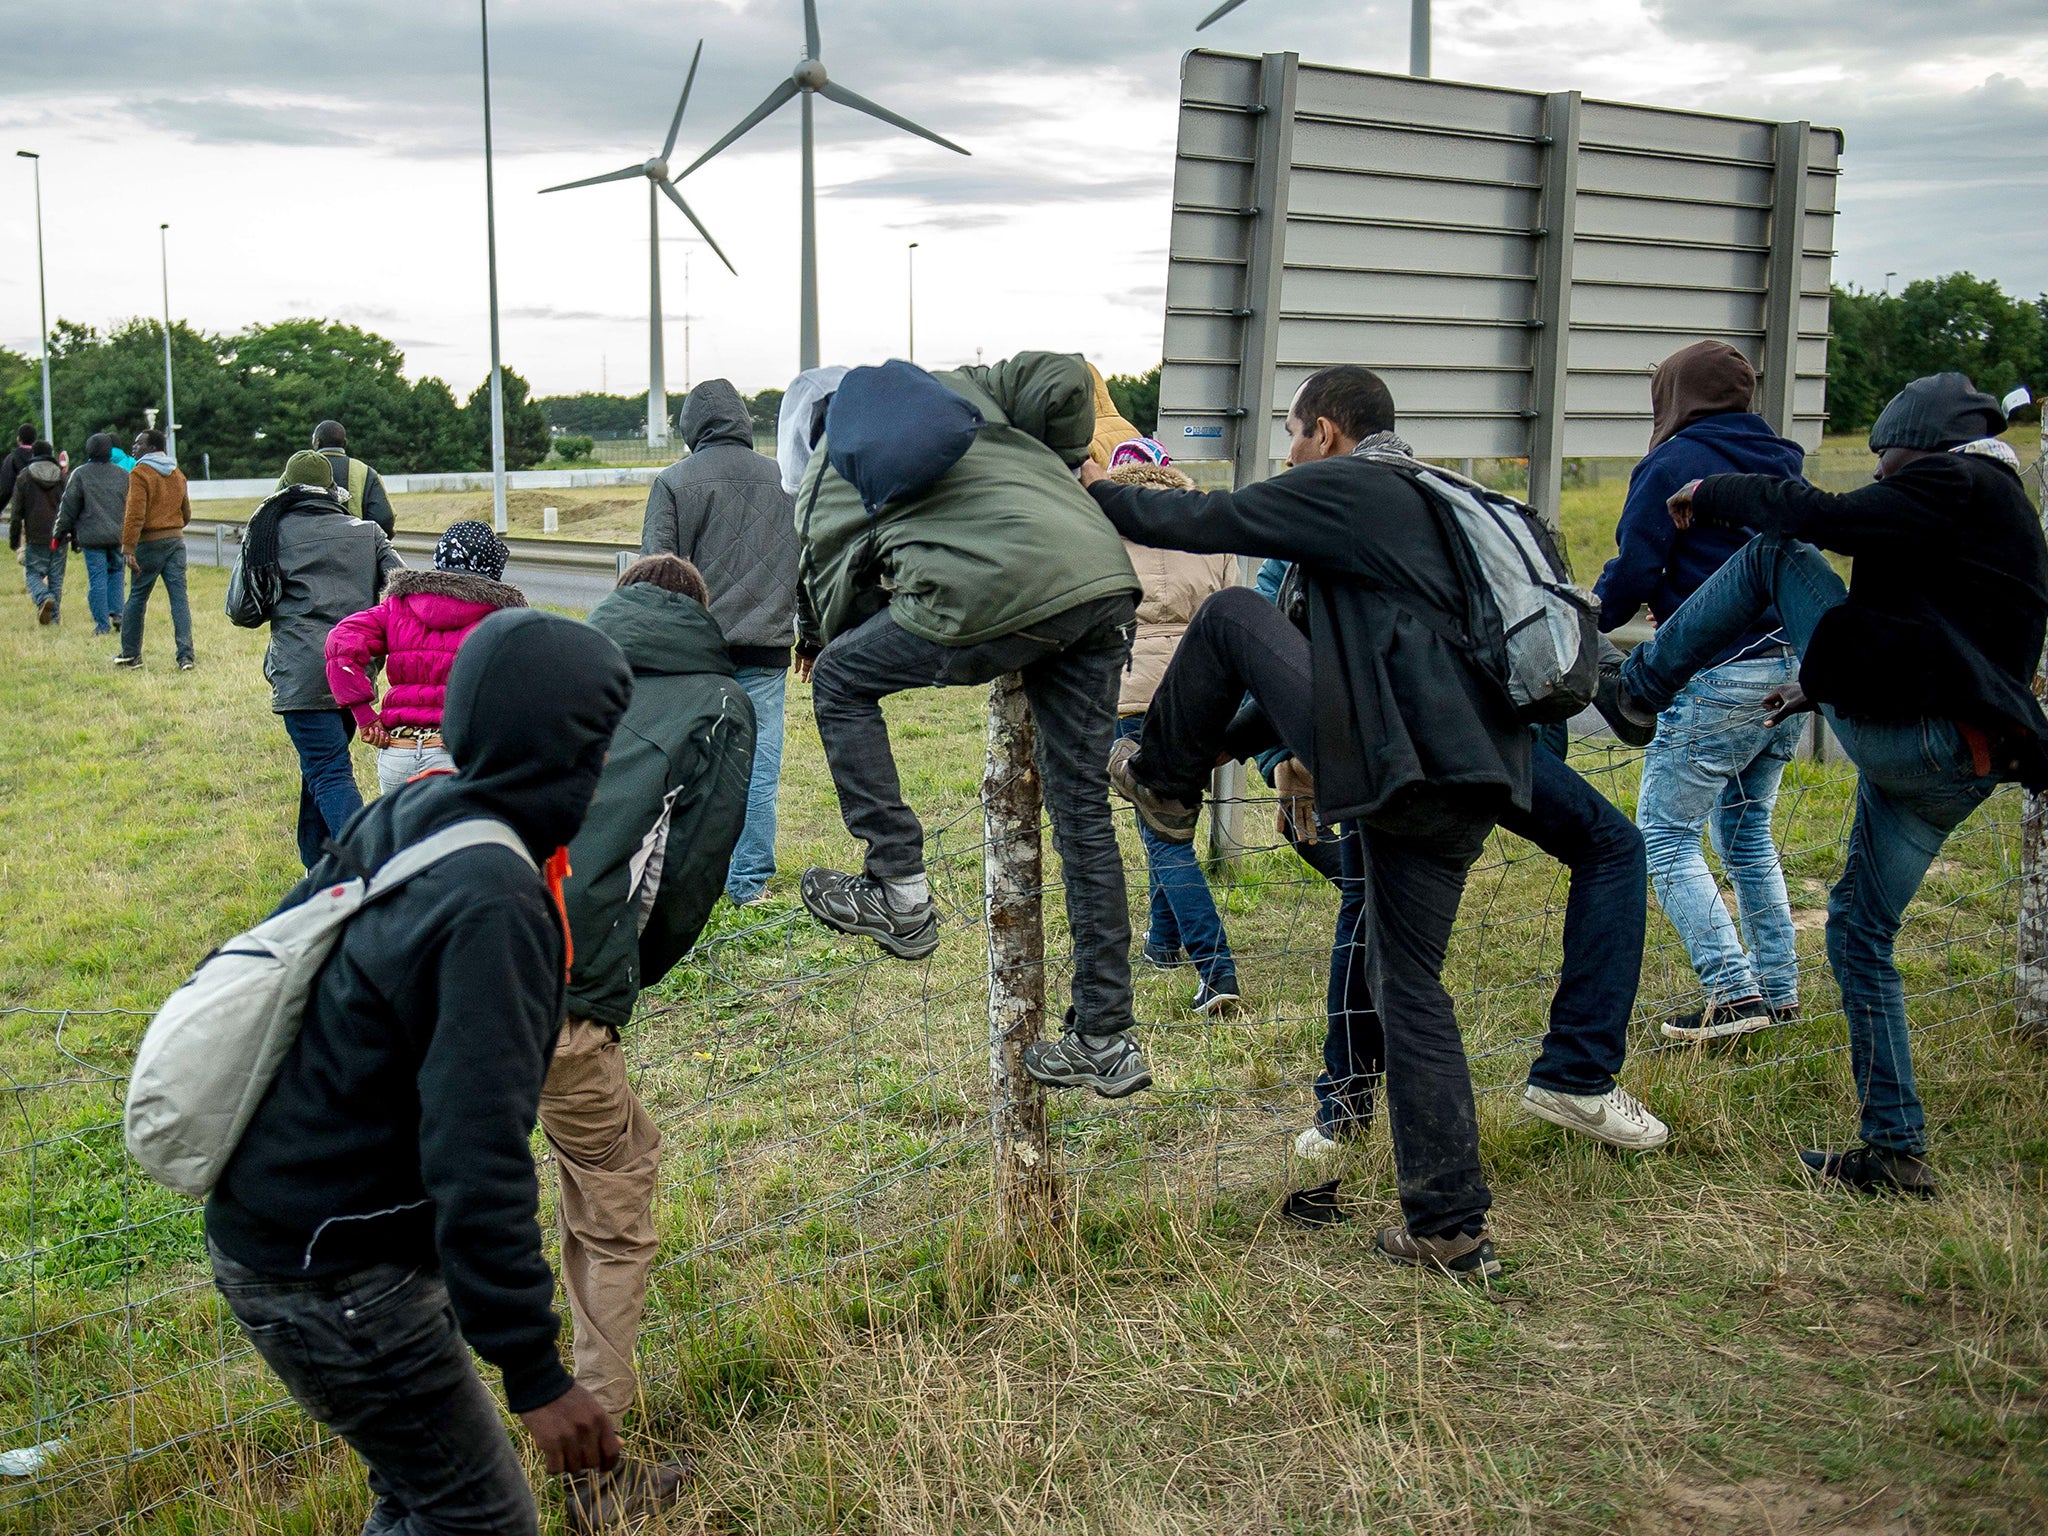 Migrants who managed to pass the police block on the Eurotunnel site climb over a fence to make their way towards the boarding docks in Coquelles near Calais